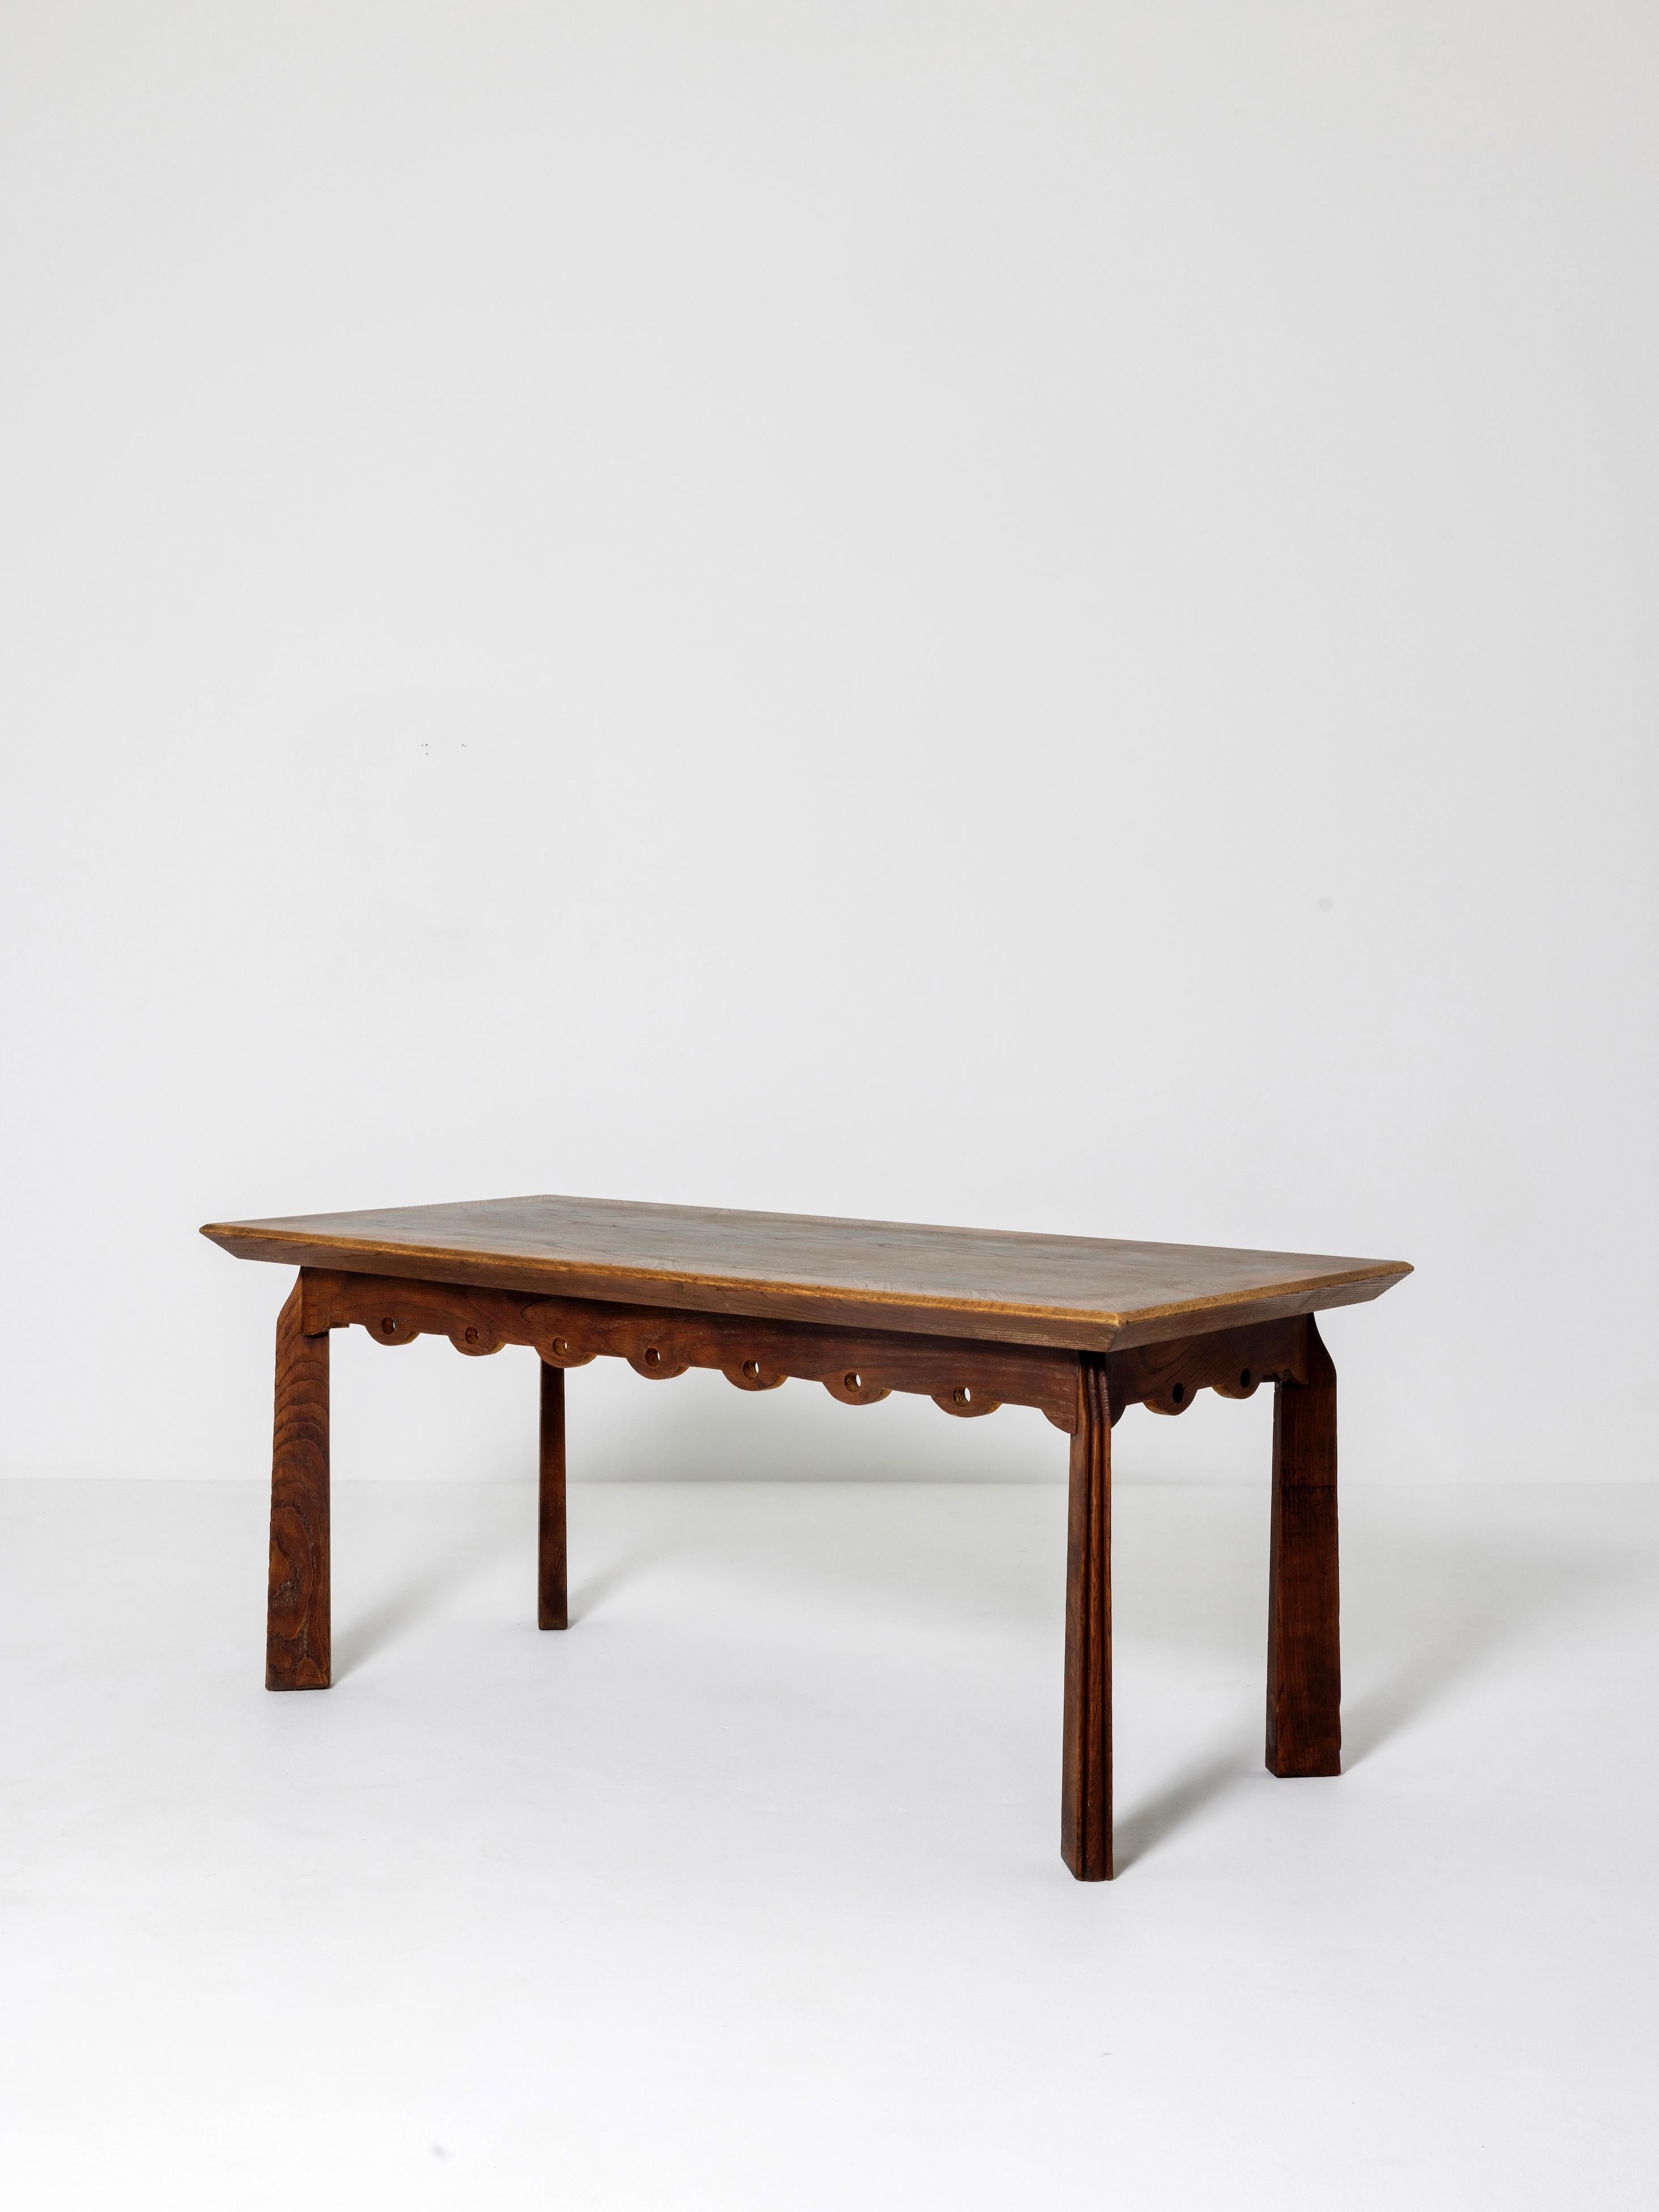 Italian Design dining table by Paolo Buffa
Material : Oak wood
Dimensions : H 80 x 180 x 82 cm
Year : Circa 1940
A rare piece made in the early 1940's by Paolo Buffa (Italy) referred as a modern design work. This piece of furniture recalls in